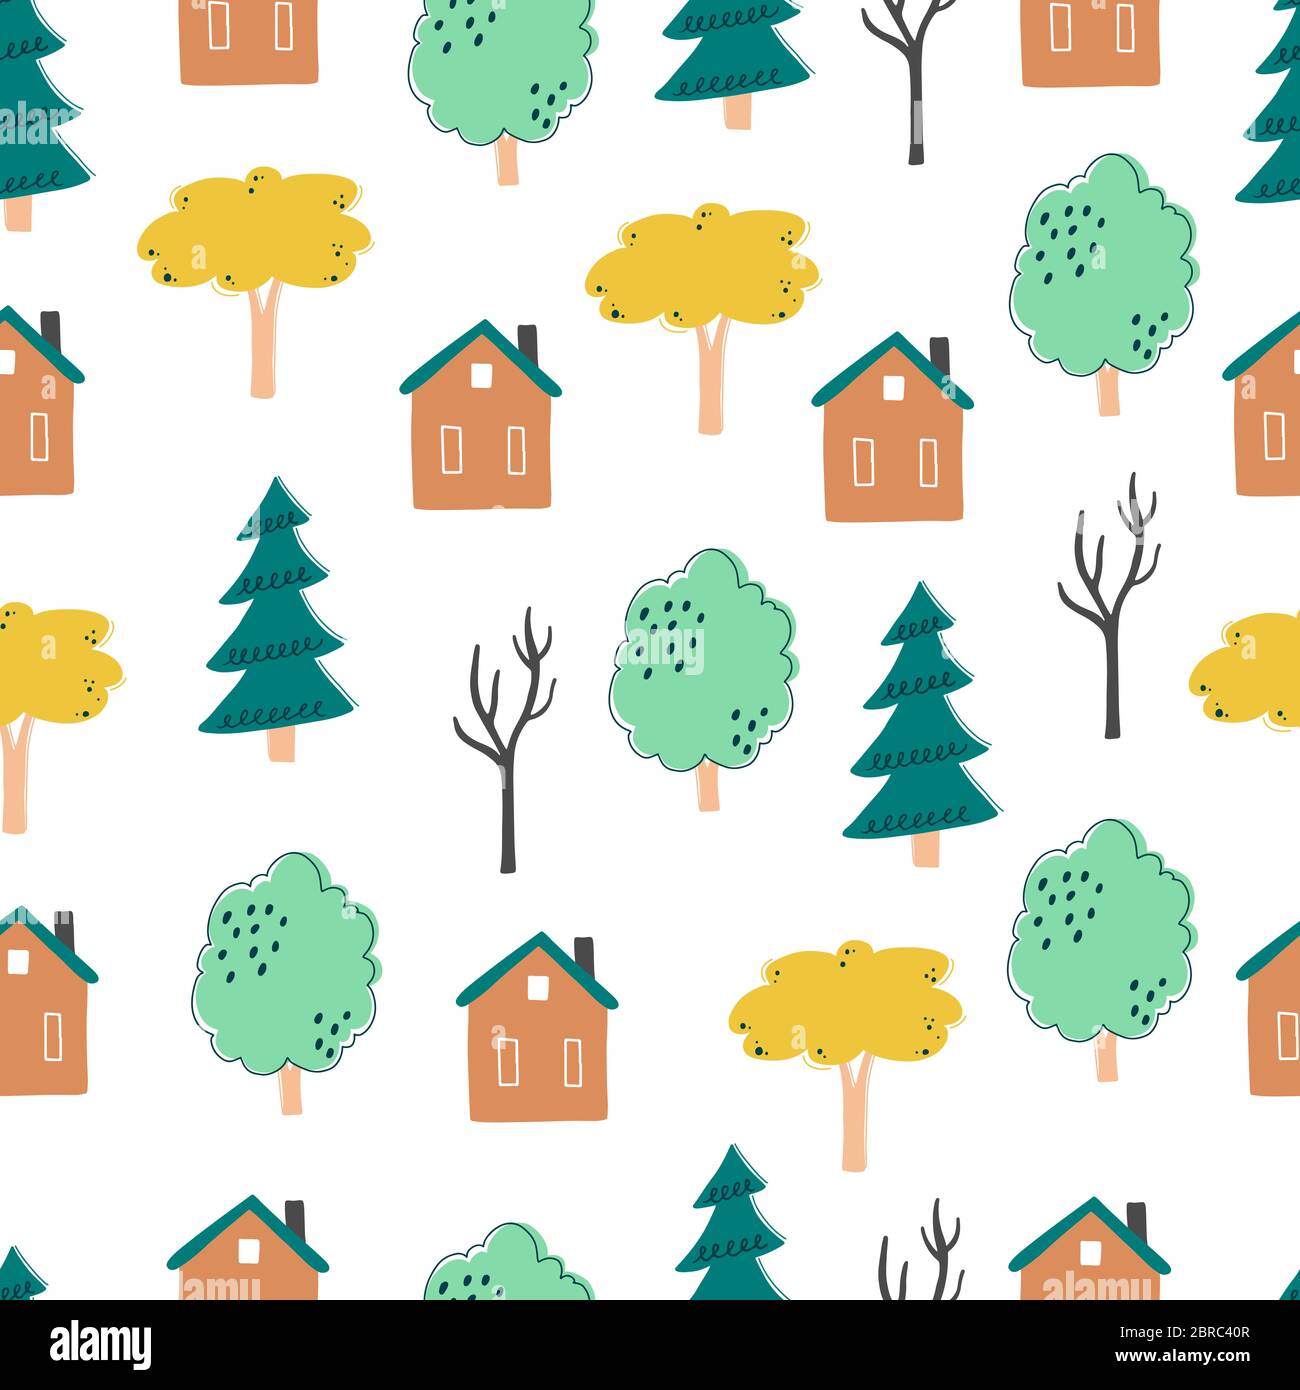 Seamless Pattern Of Childish Cartoon Town City With Tree And